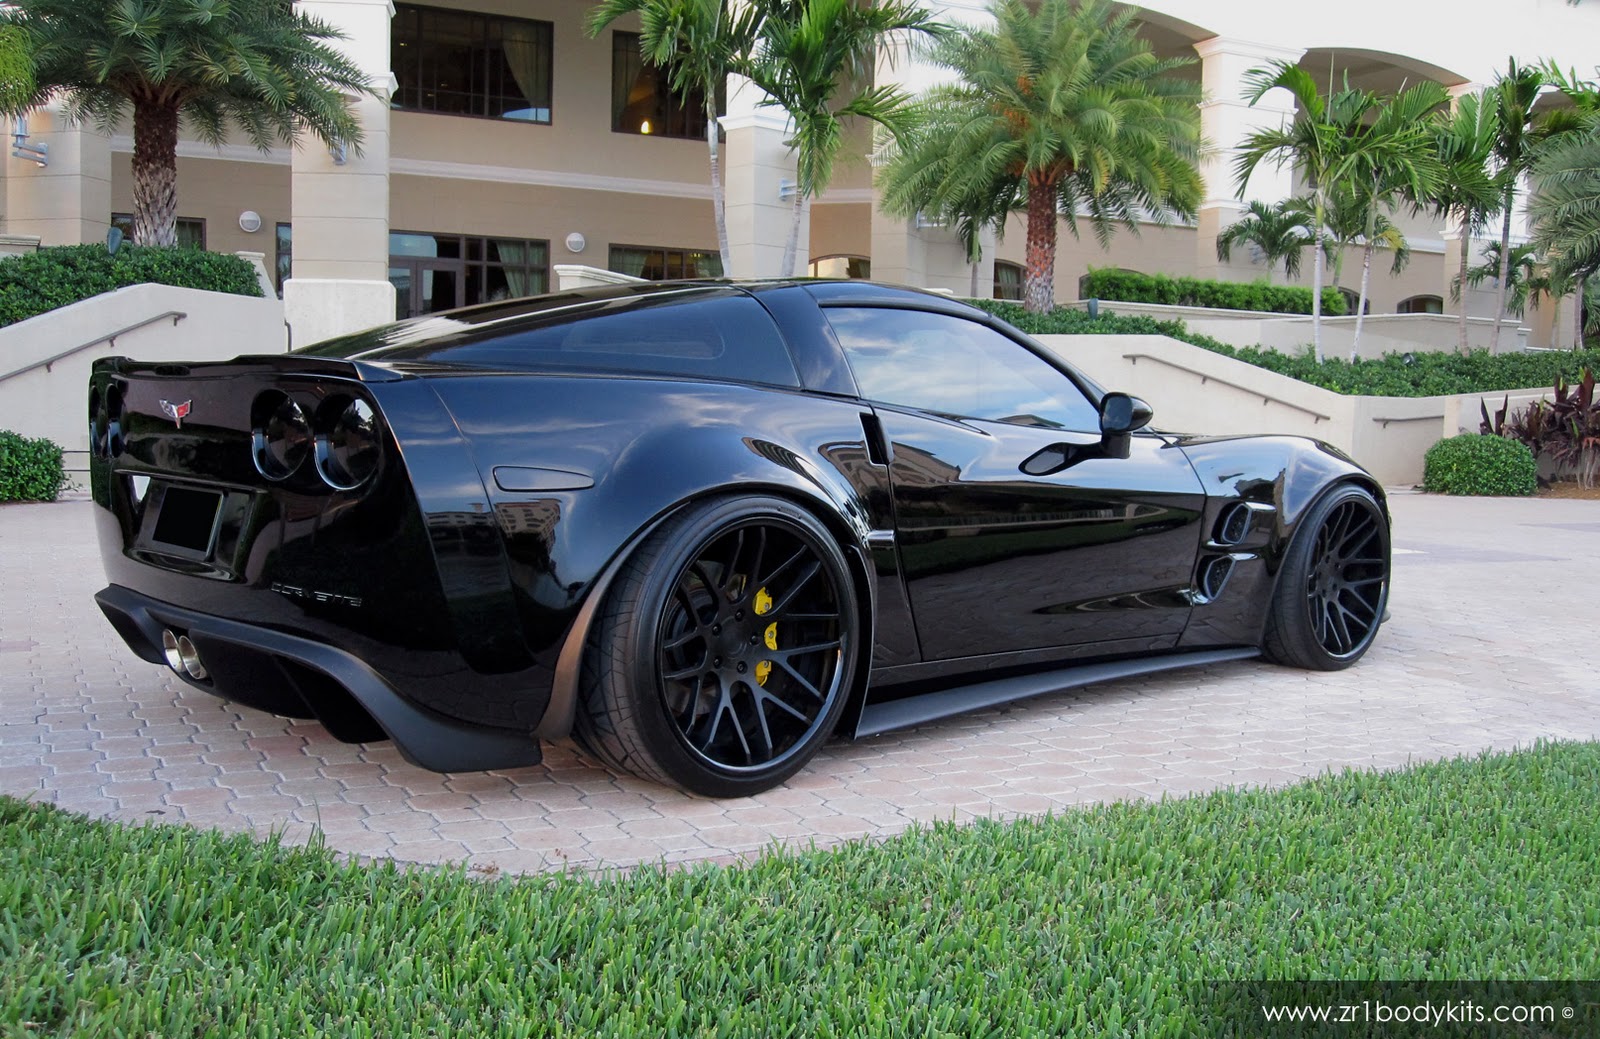 Cool Chevrolet Corvette with extreme car body kit | The World's Most